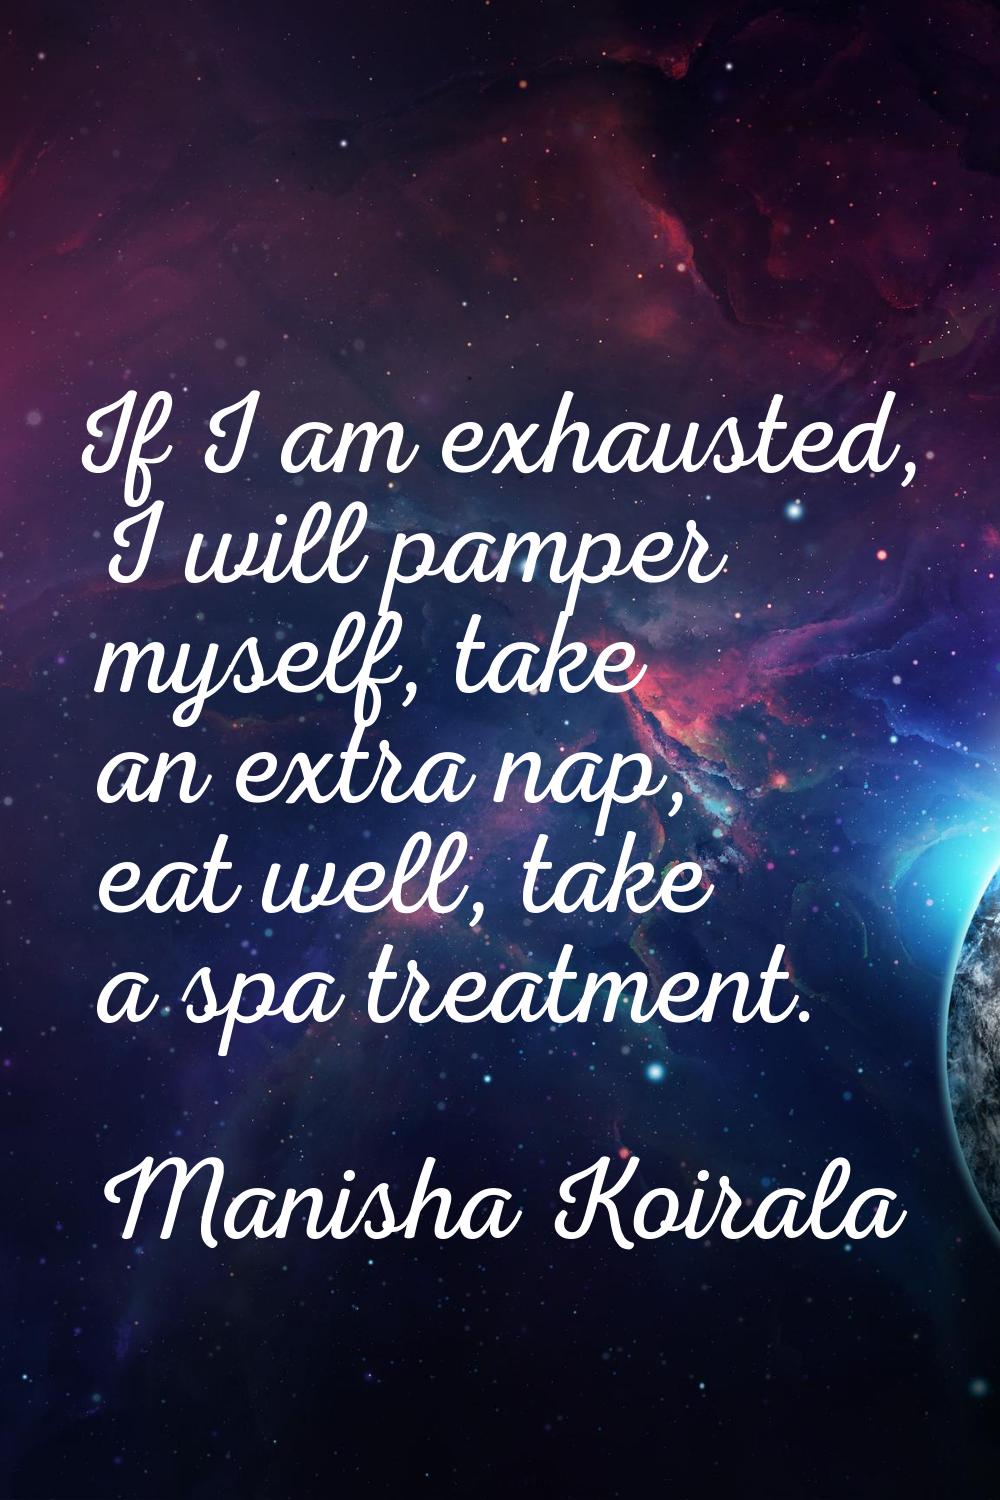 If I am exhausted, I will pamper myself, take an extra nap, eat well, take a spa treatment.